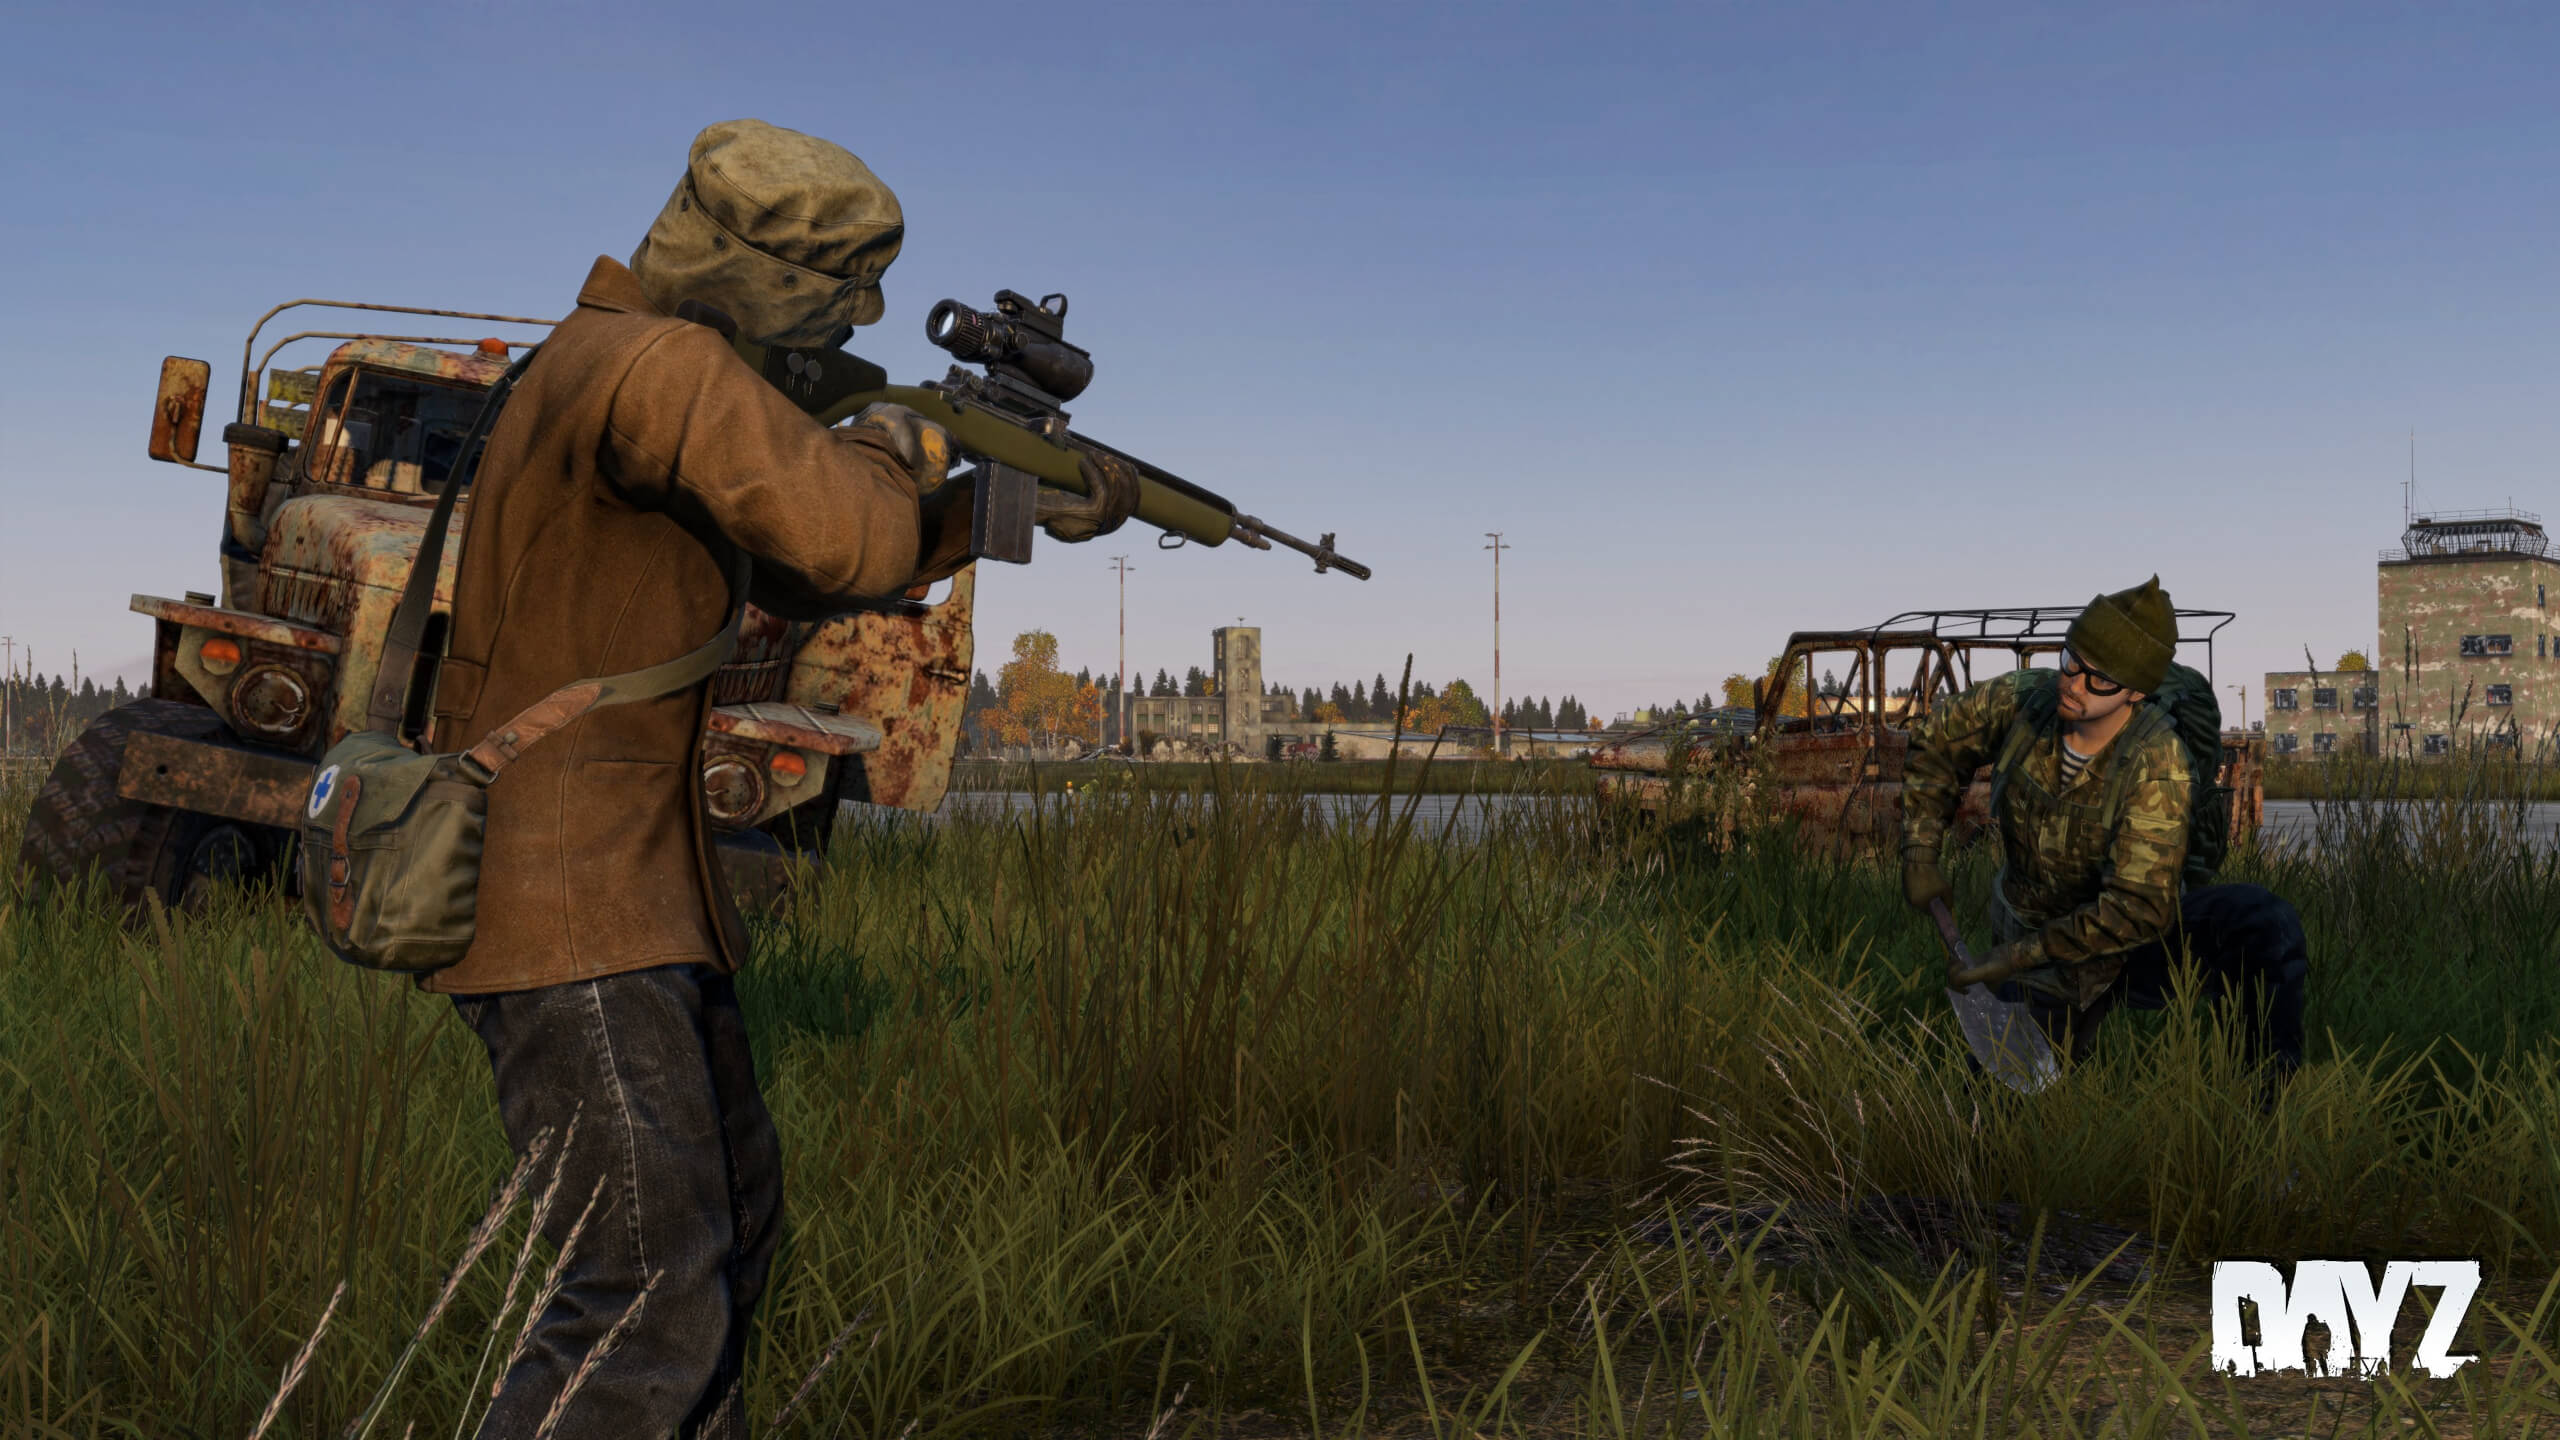 Dayz 1.23 Patch Notes, Dayz 1.23 Patch Notes Release Date - News